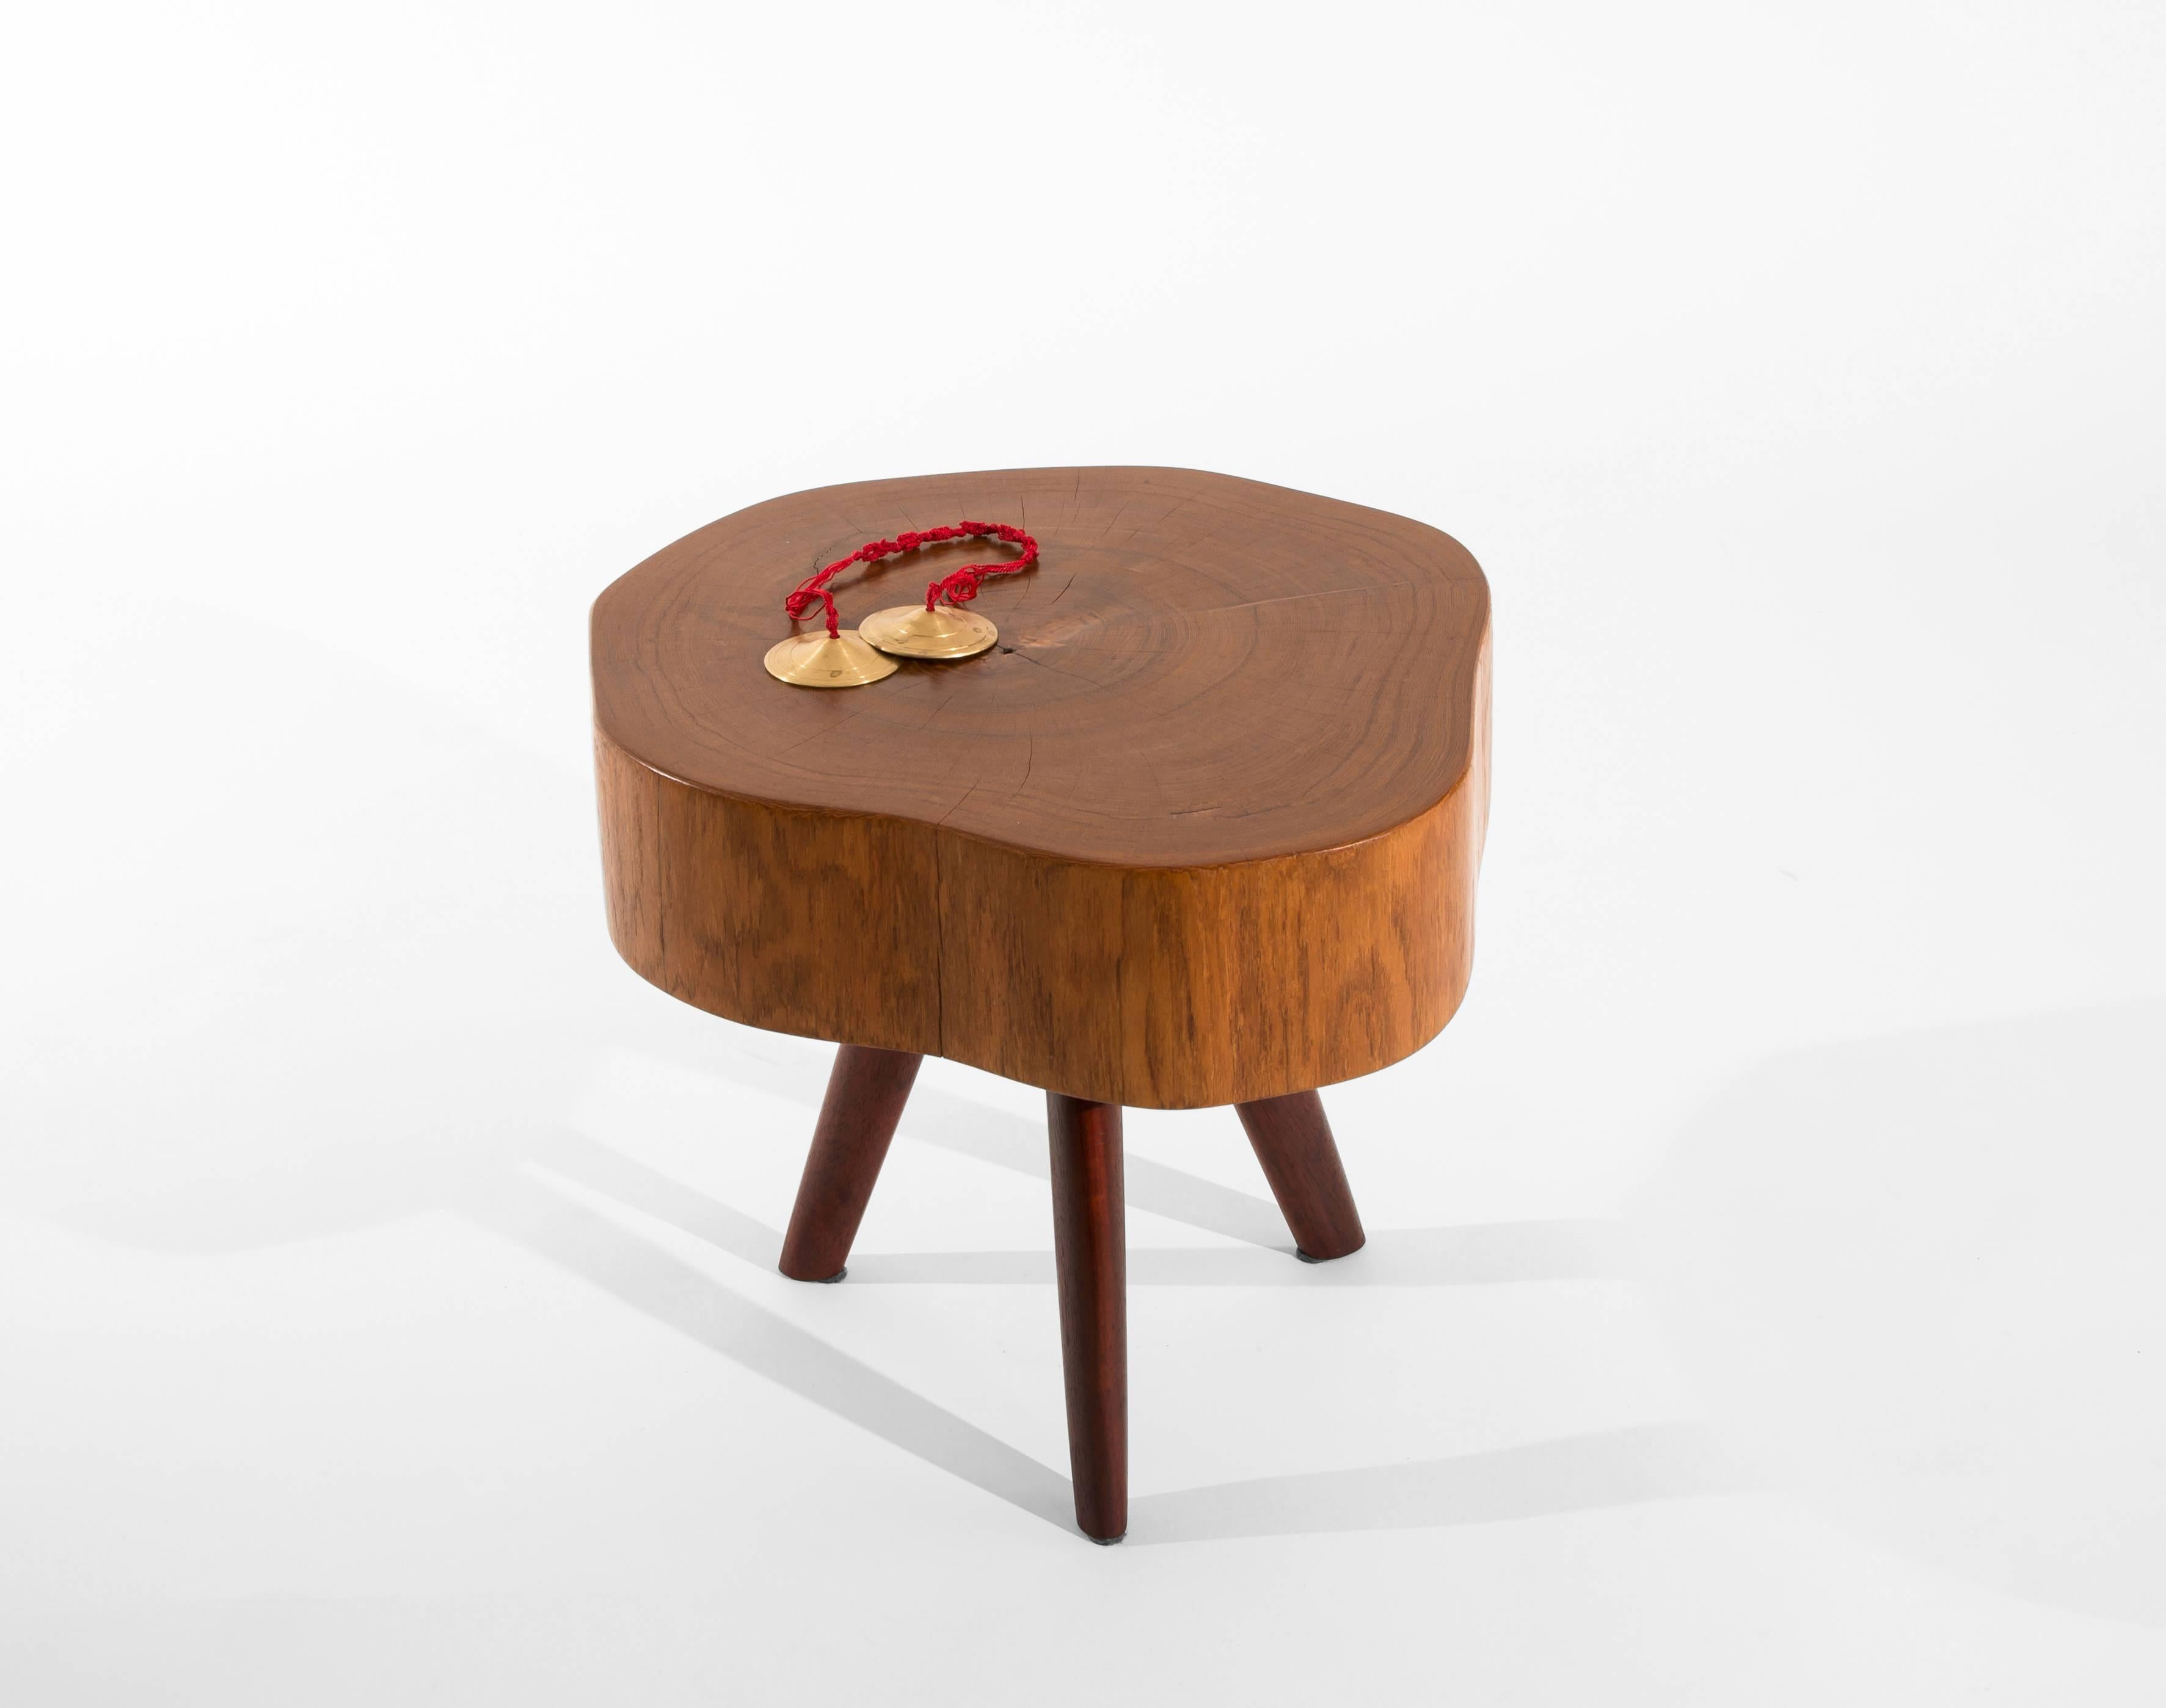 Unique signed table by Jörg Pietschmann
Side Table · Teak / Padouk 
Measures: H 37 x W 47 x D 43,5 cm tabletop 10,5 cm
Beautifully shaped and coloured stem section of teak wood
on three oval shaped, deep red legs from padouk.
Polished oil